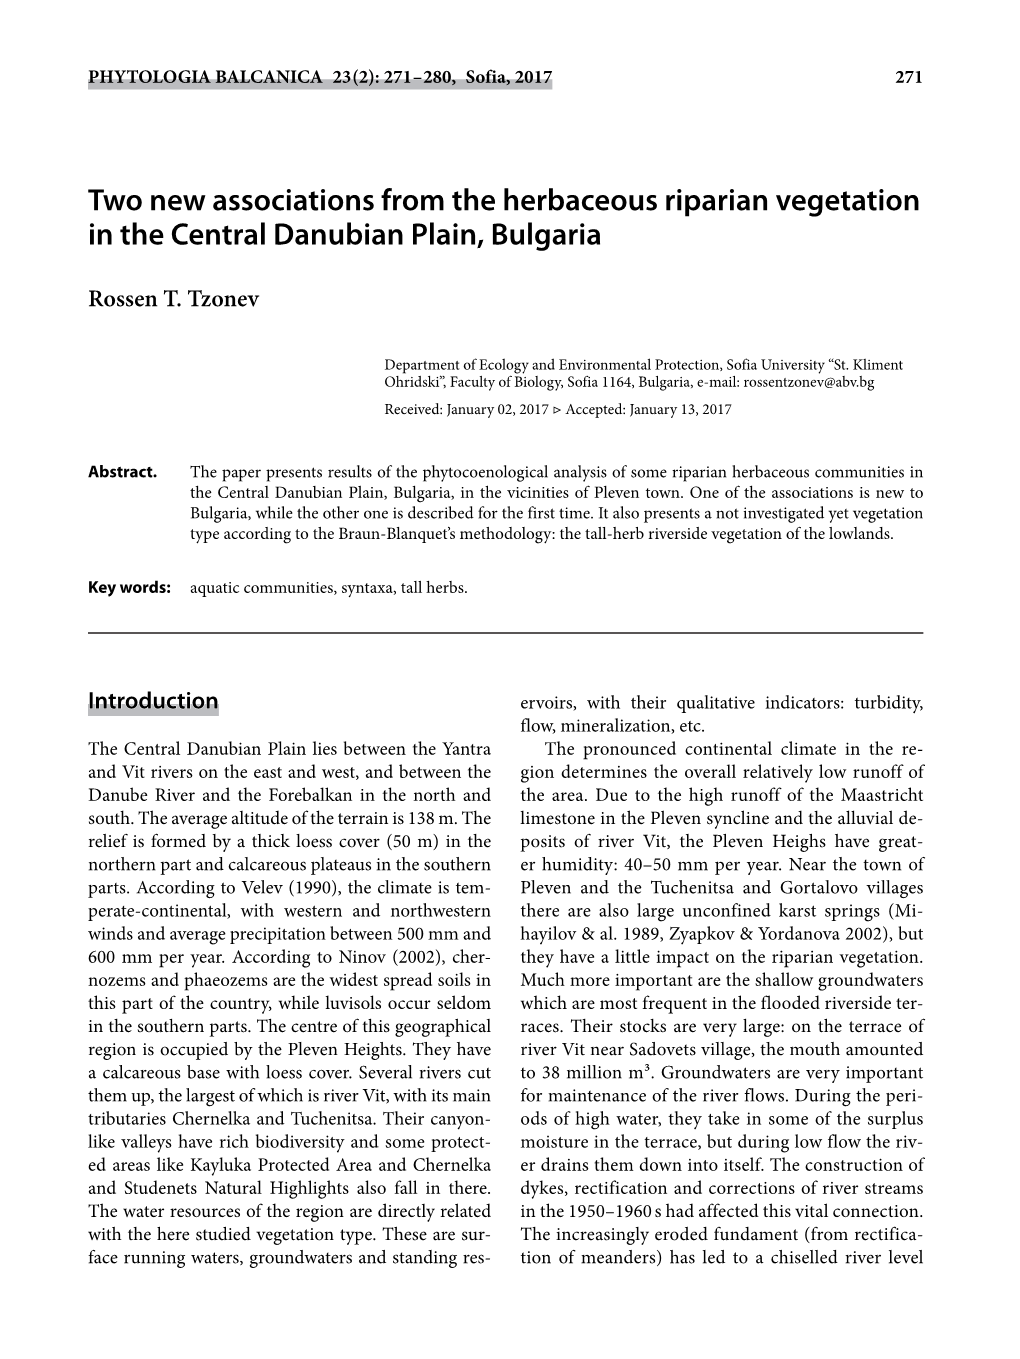 Two New Associations from the Herbaceous Riparian Vegetation in the Central Danubian Plain, Bulgaria